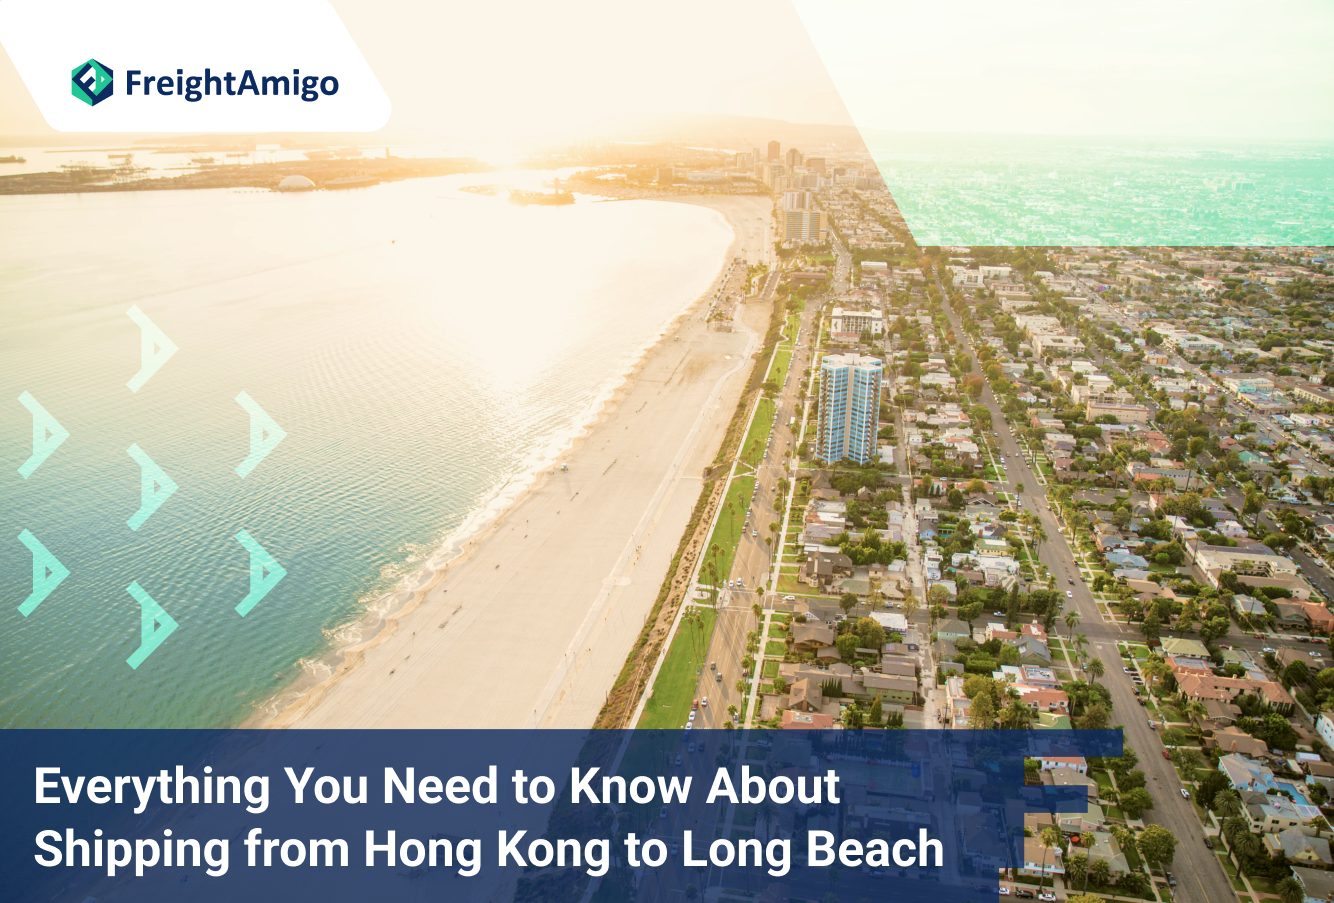 Everything You Need to Know About Shipping from Hong Kong to Long Beach